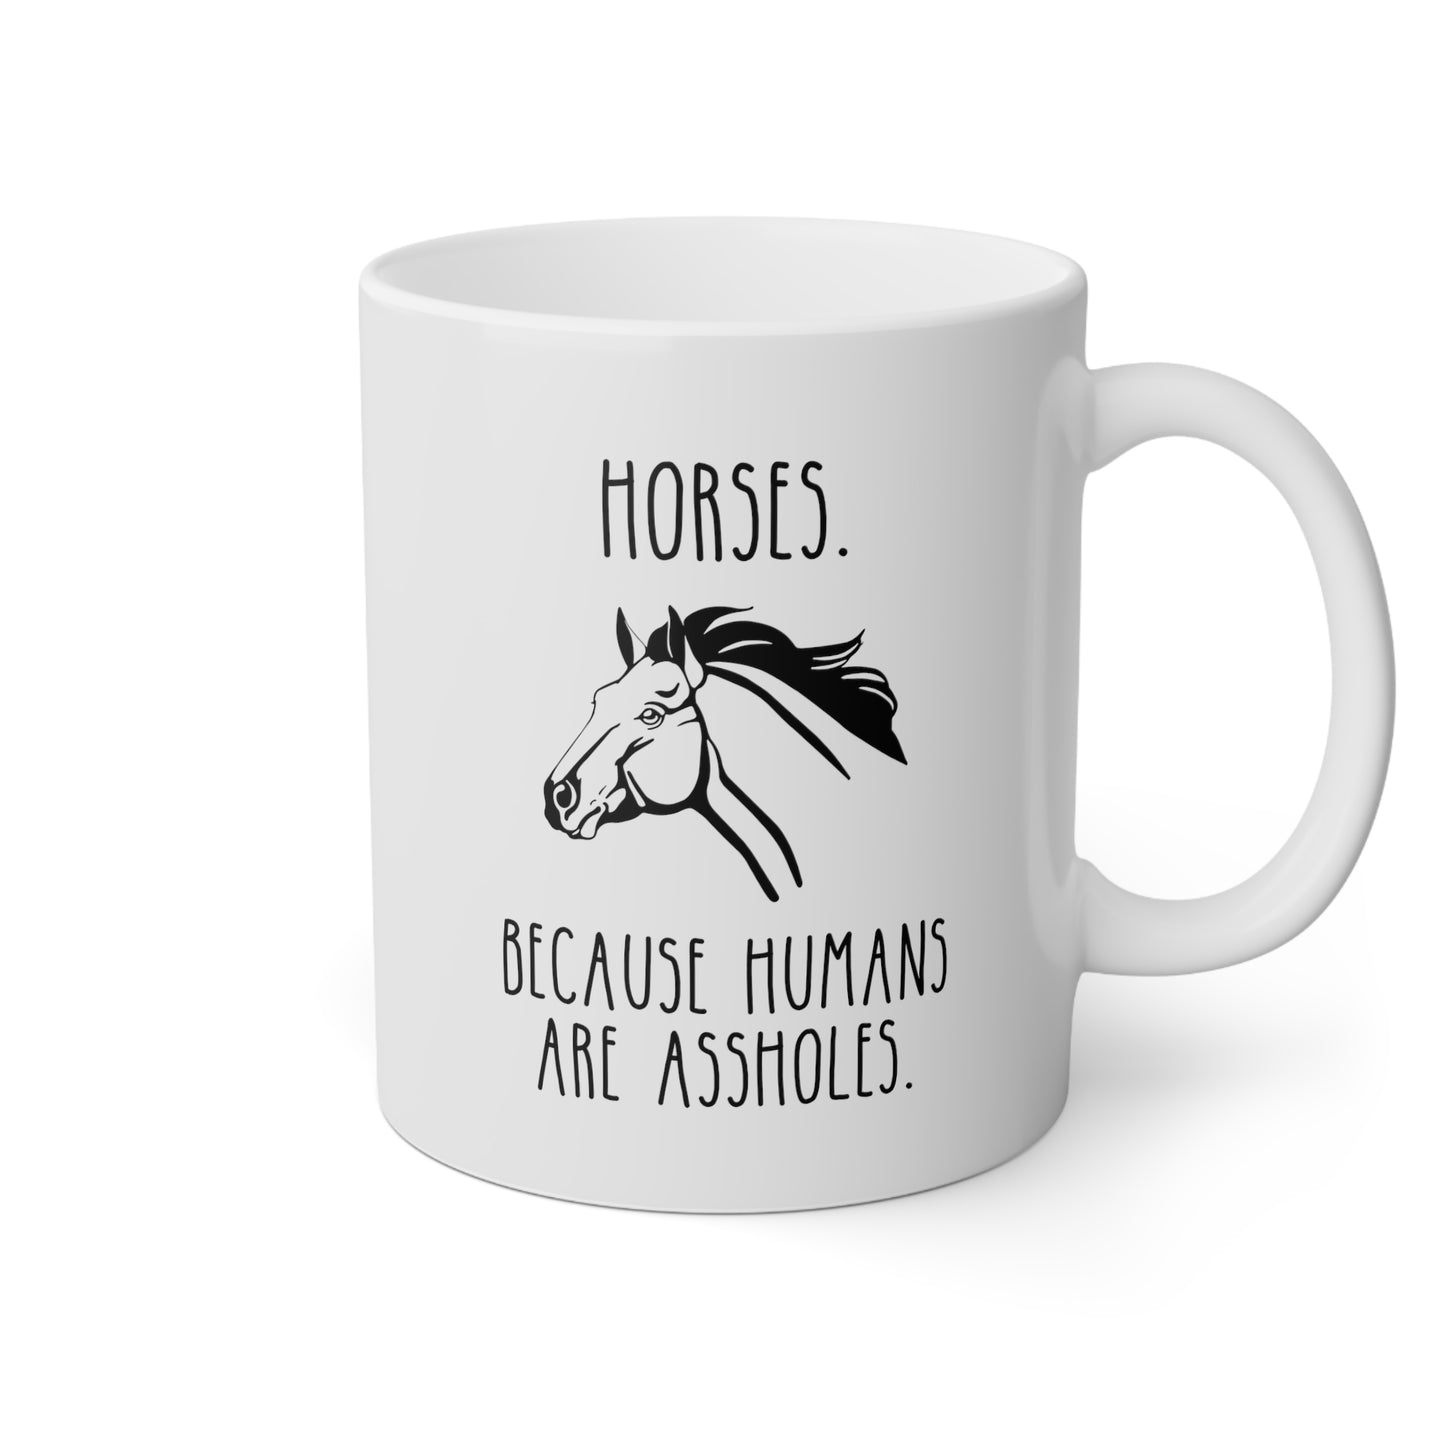 Horses Because Humans Are Assholes 11oz white funny large coffee mug gift for owner horse riding pony equestrian waveywares wavey wares wavywares wavy wares